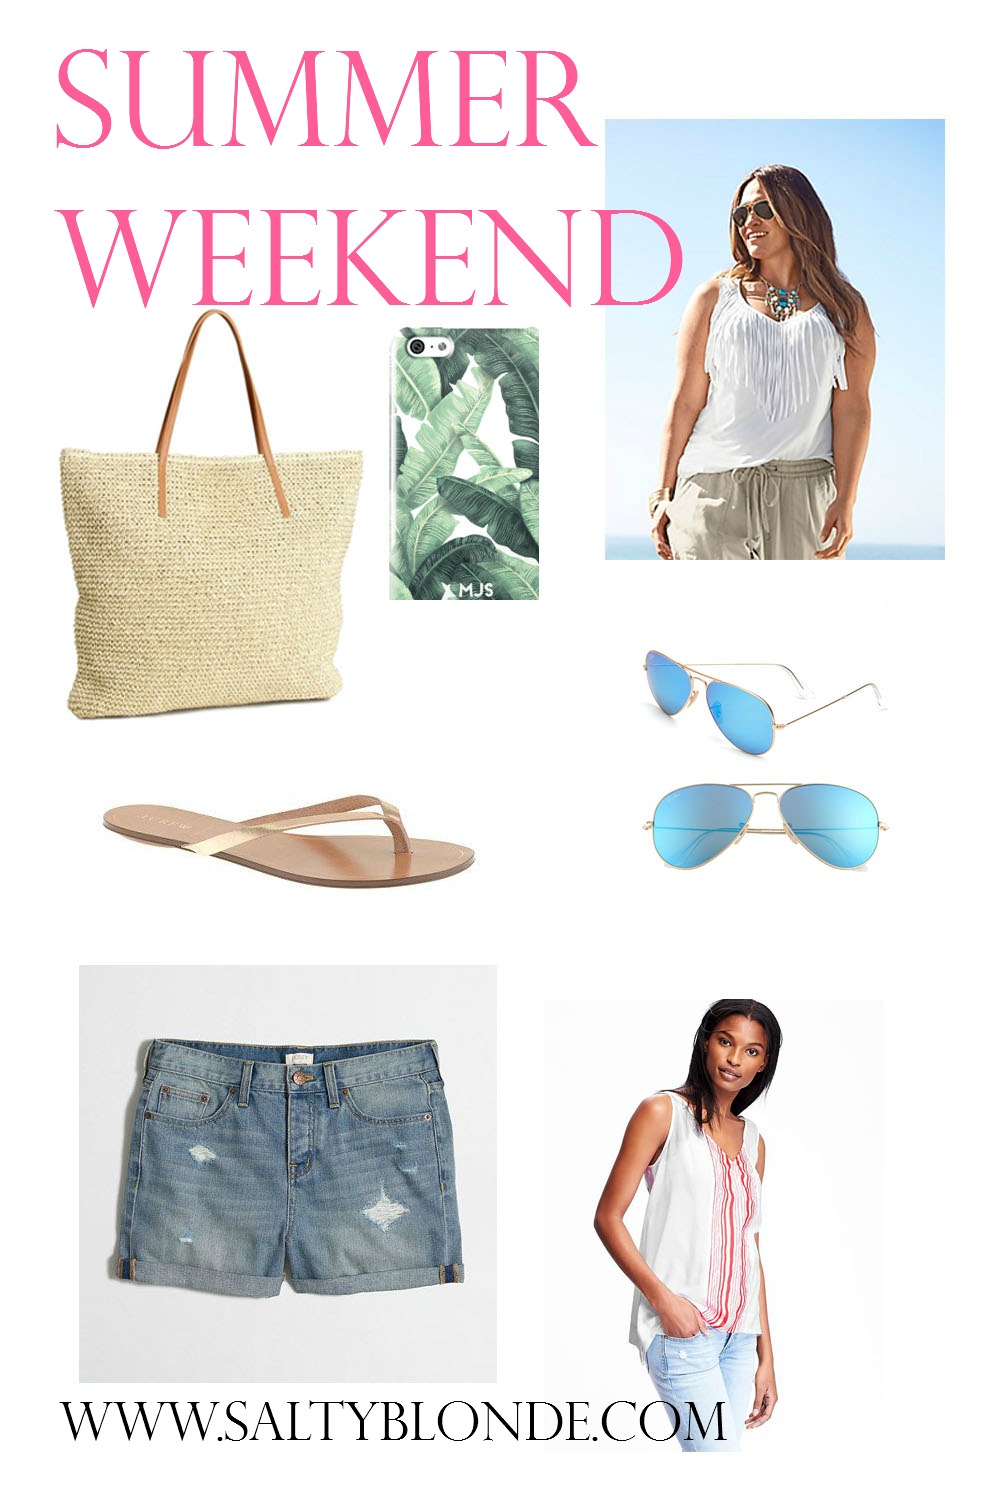 Summer Weekend Outfit Inspiration - Salty Blonde